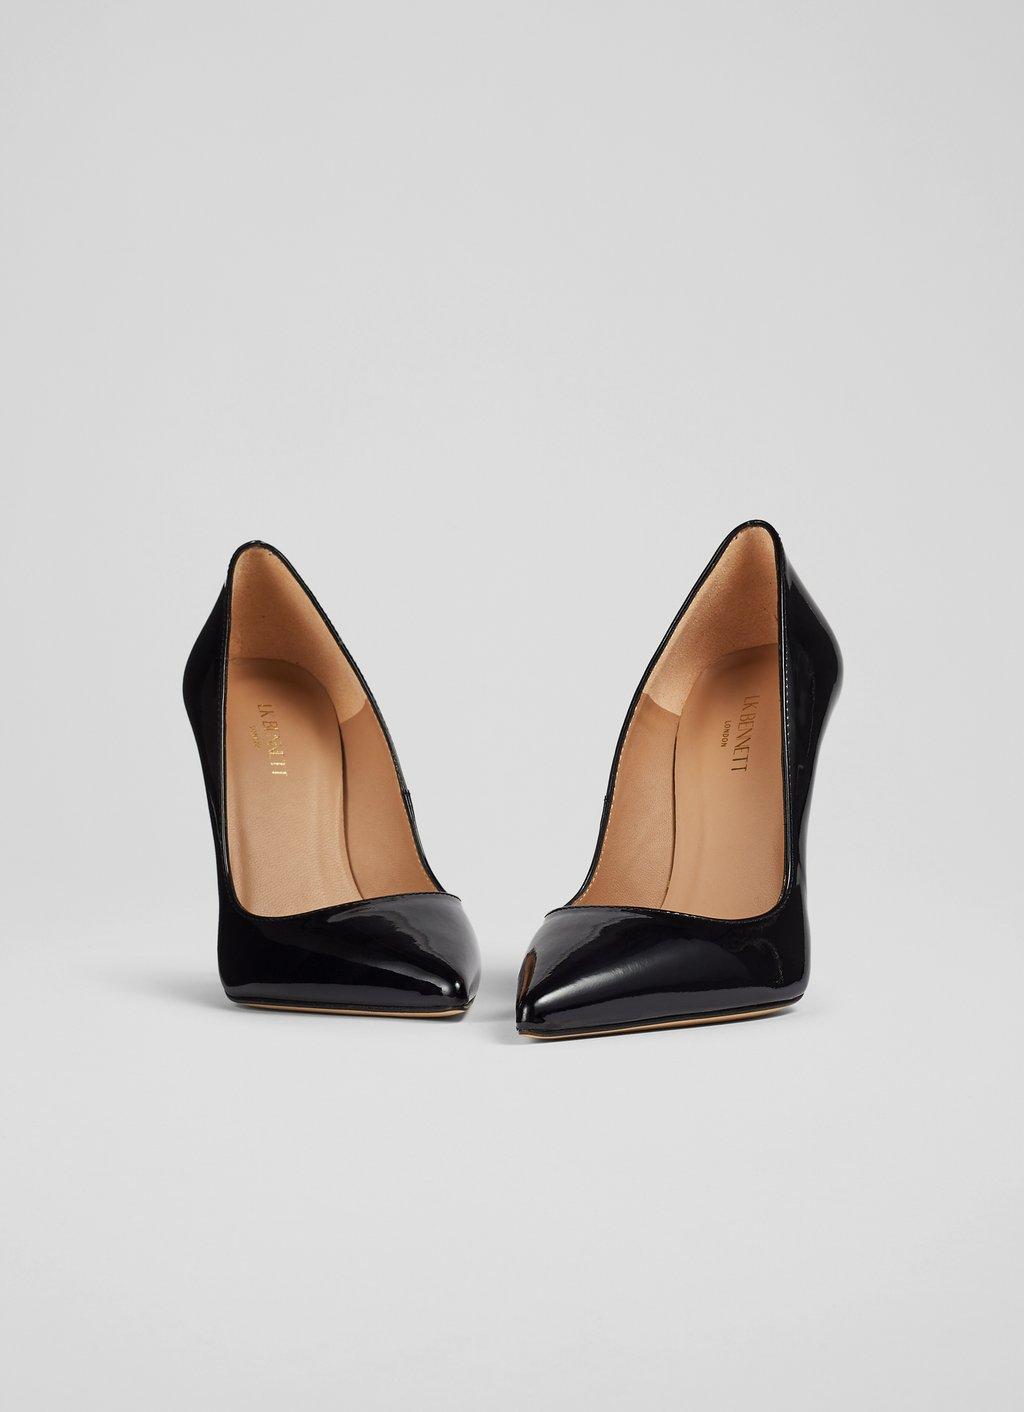 Monroe Black Patent Leather Pointed Toe Courts, Shoes, Collections